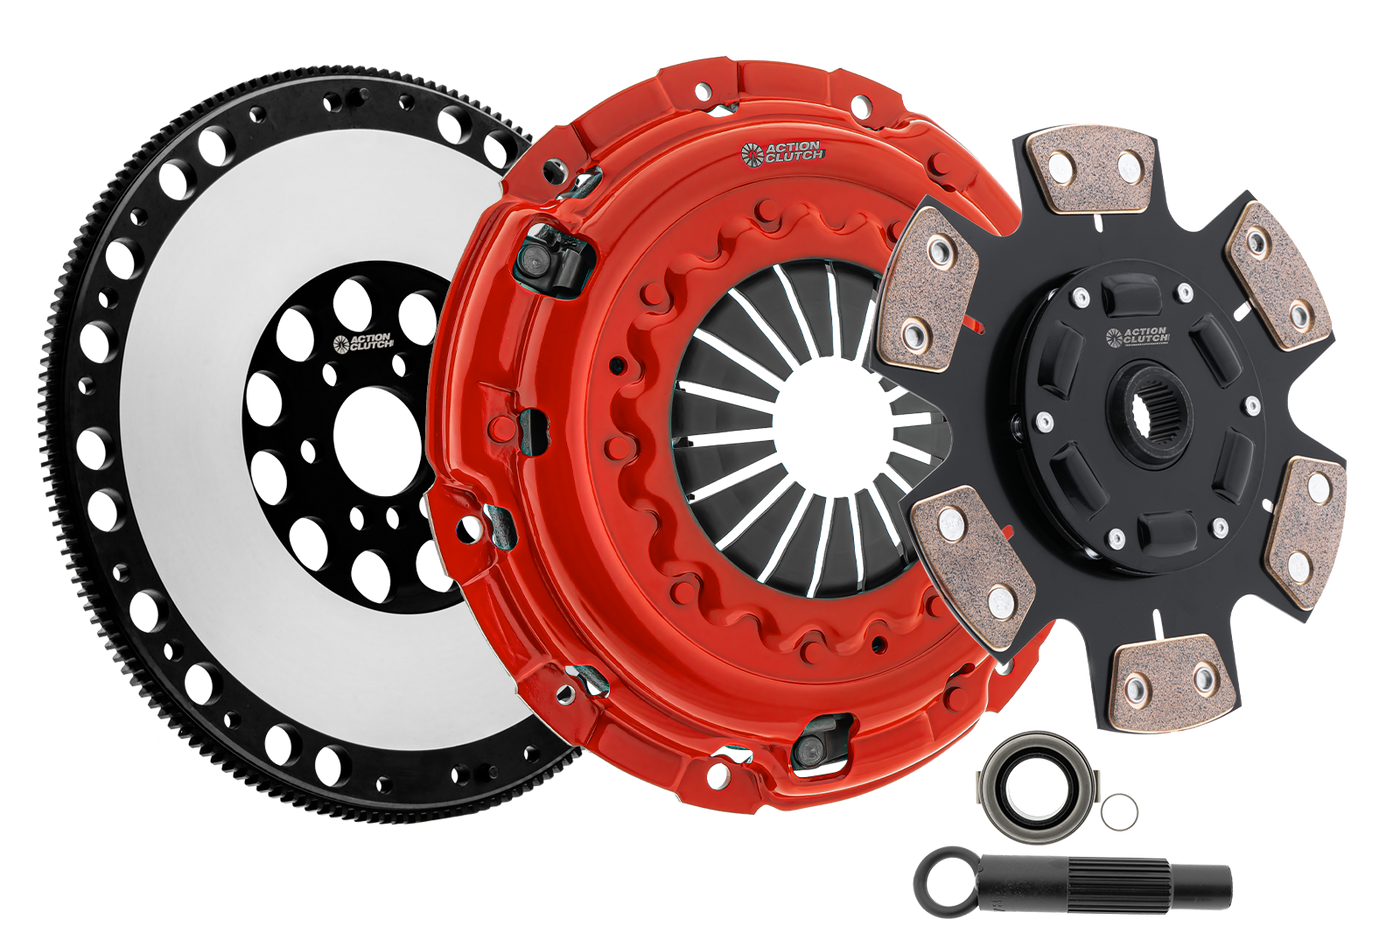 Stage 5 Clutch Kit (2MS) for BMW 330i 2001-2003 3.0L DOHC (M54) 5 Speed Only RWD Includes Lightened Flywheel